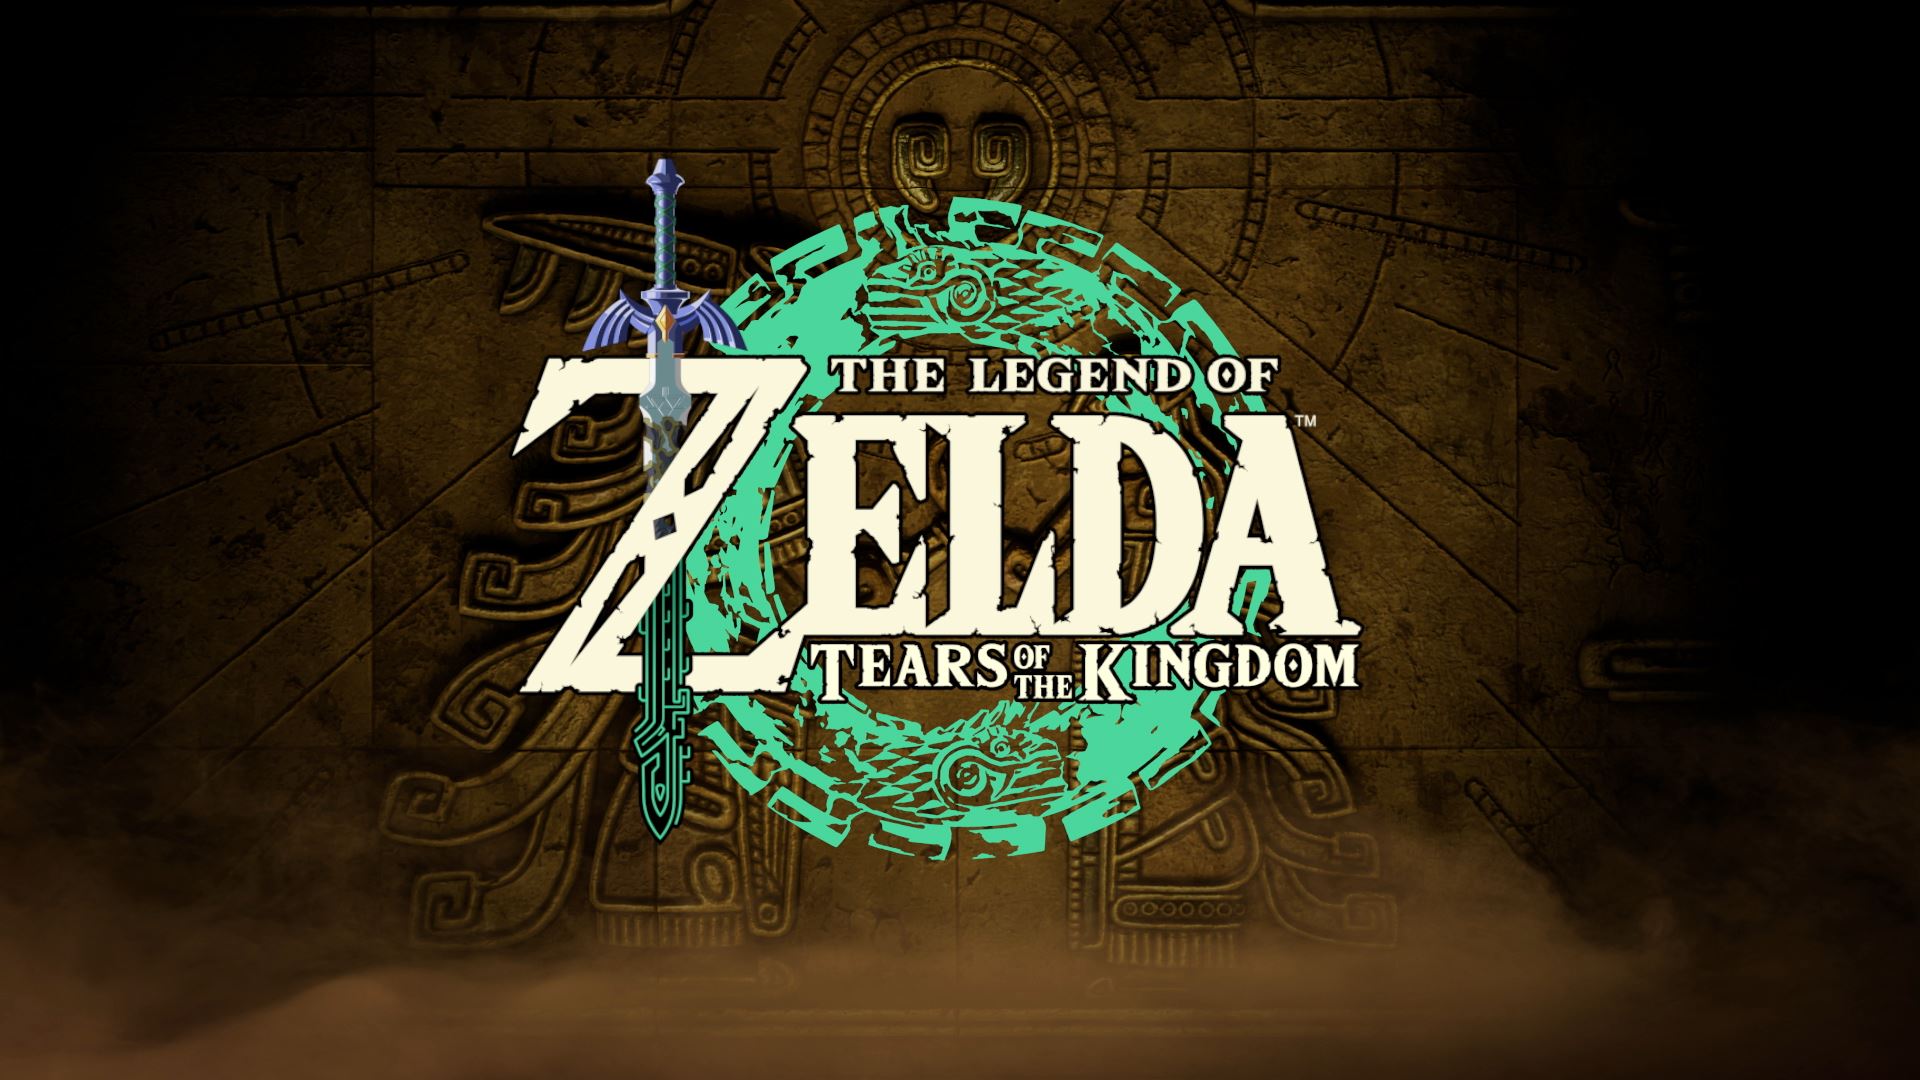 7 BIG Things You MUST Know for Zelda Tears of the Kingdom! 